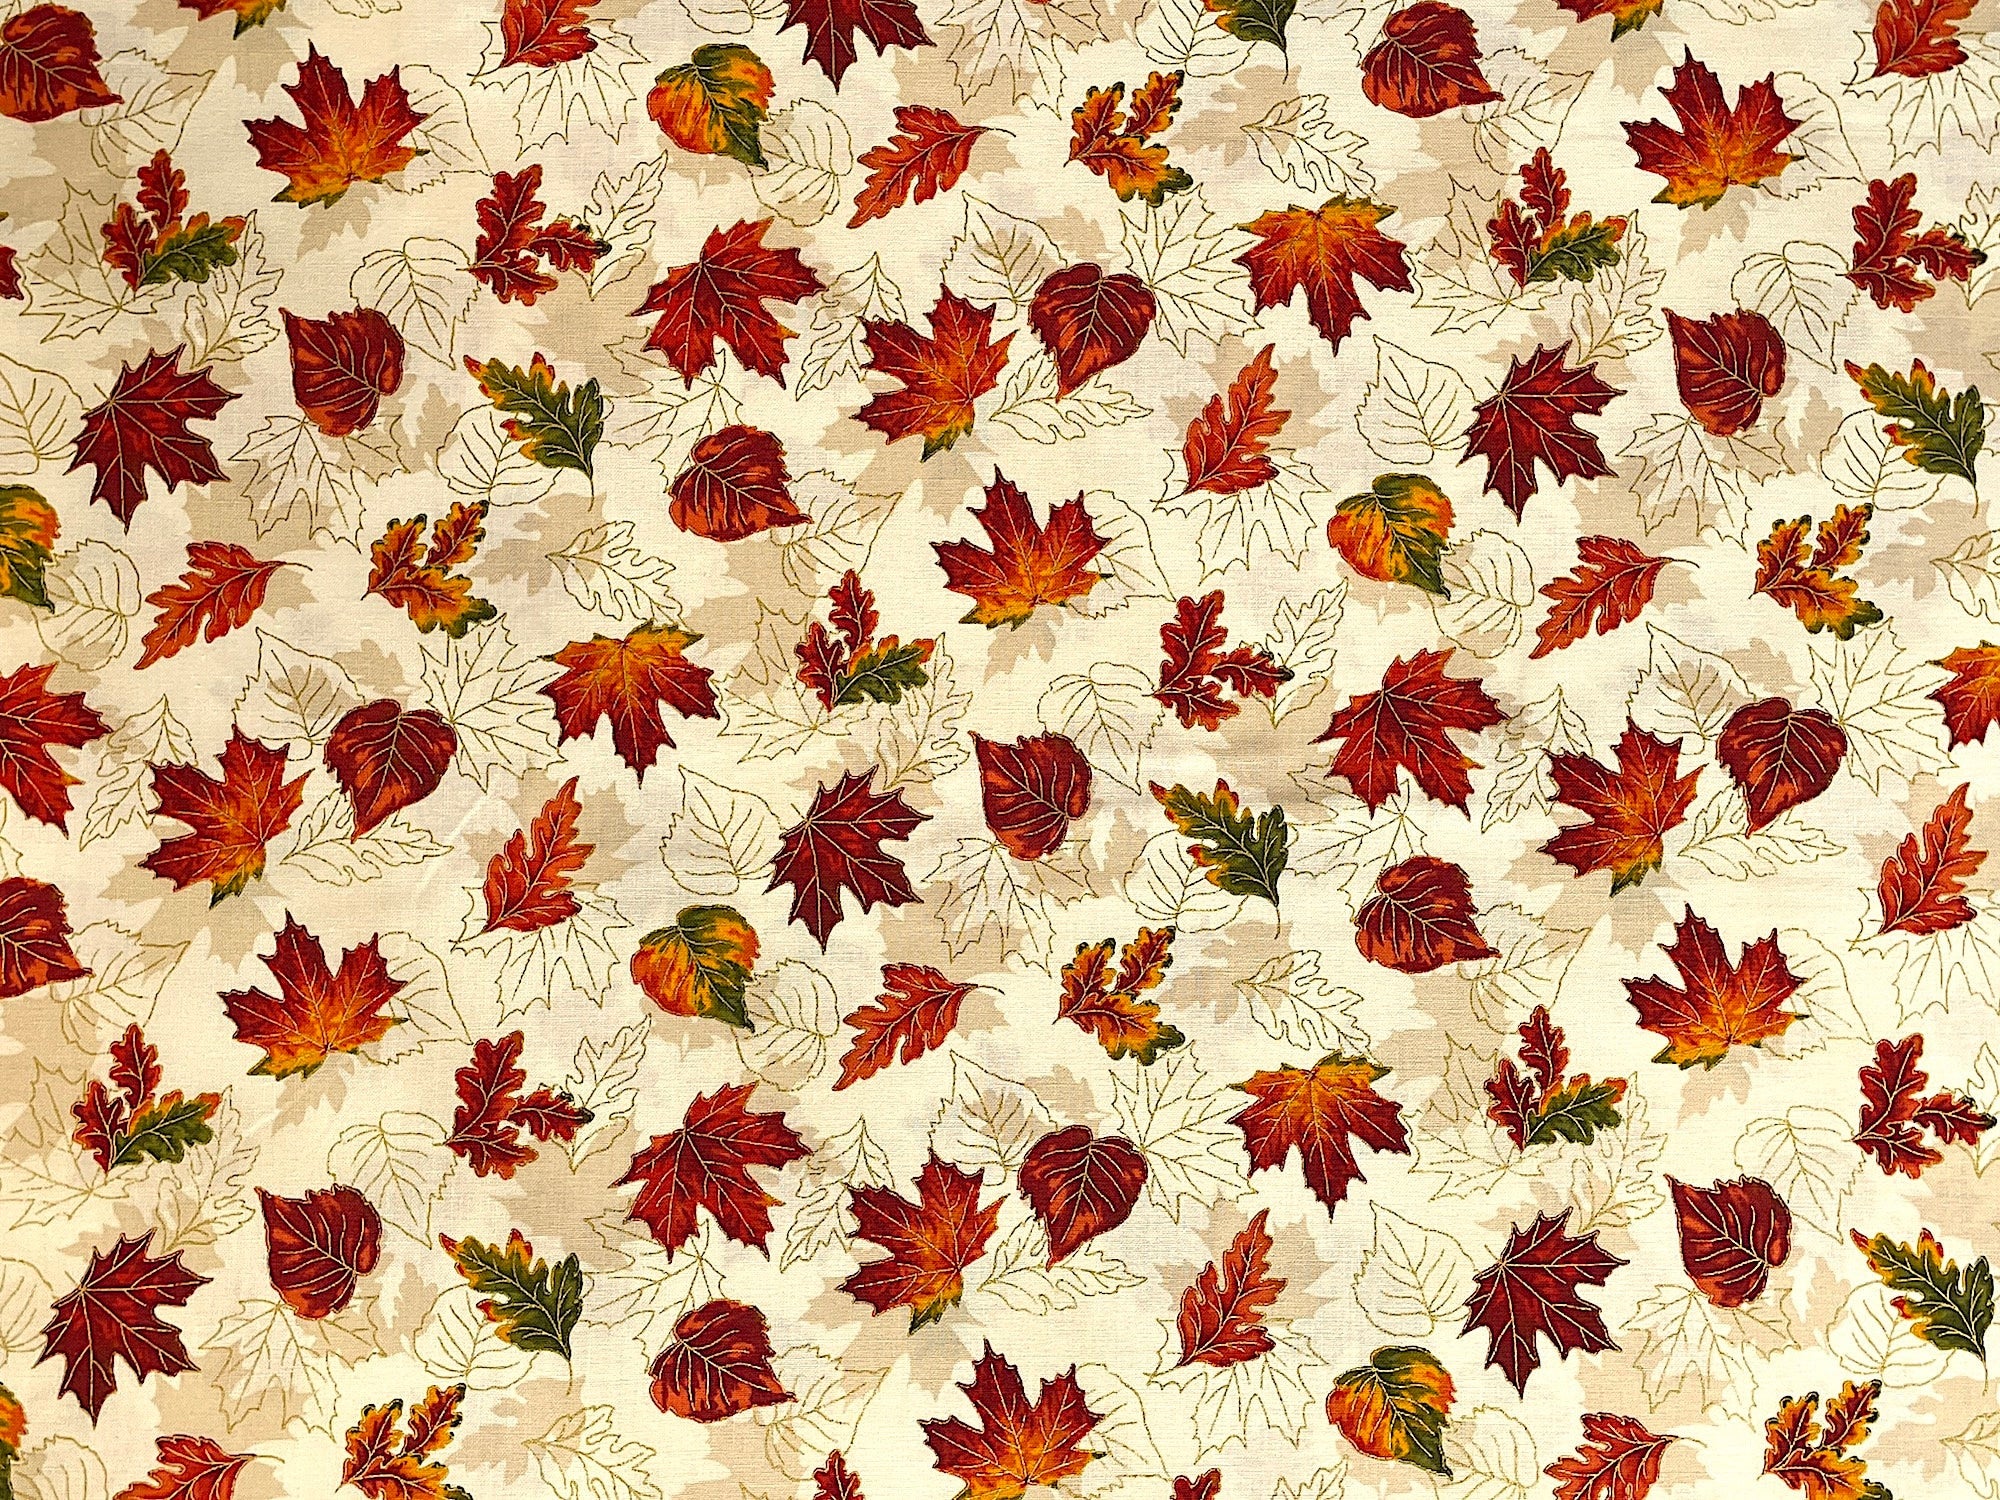 This cotton fabric is part of the Autumn Bouquet collection by Robert Kaufman. The cream colored background is covered with leaves in shades of yellow, orange and green. There are also leaf outlines throughout the fabric.